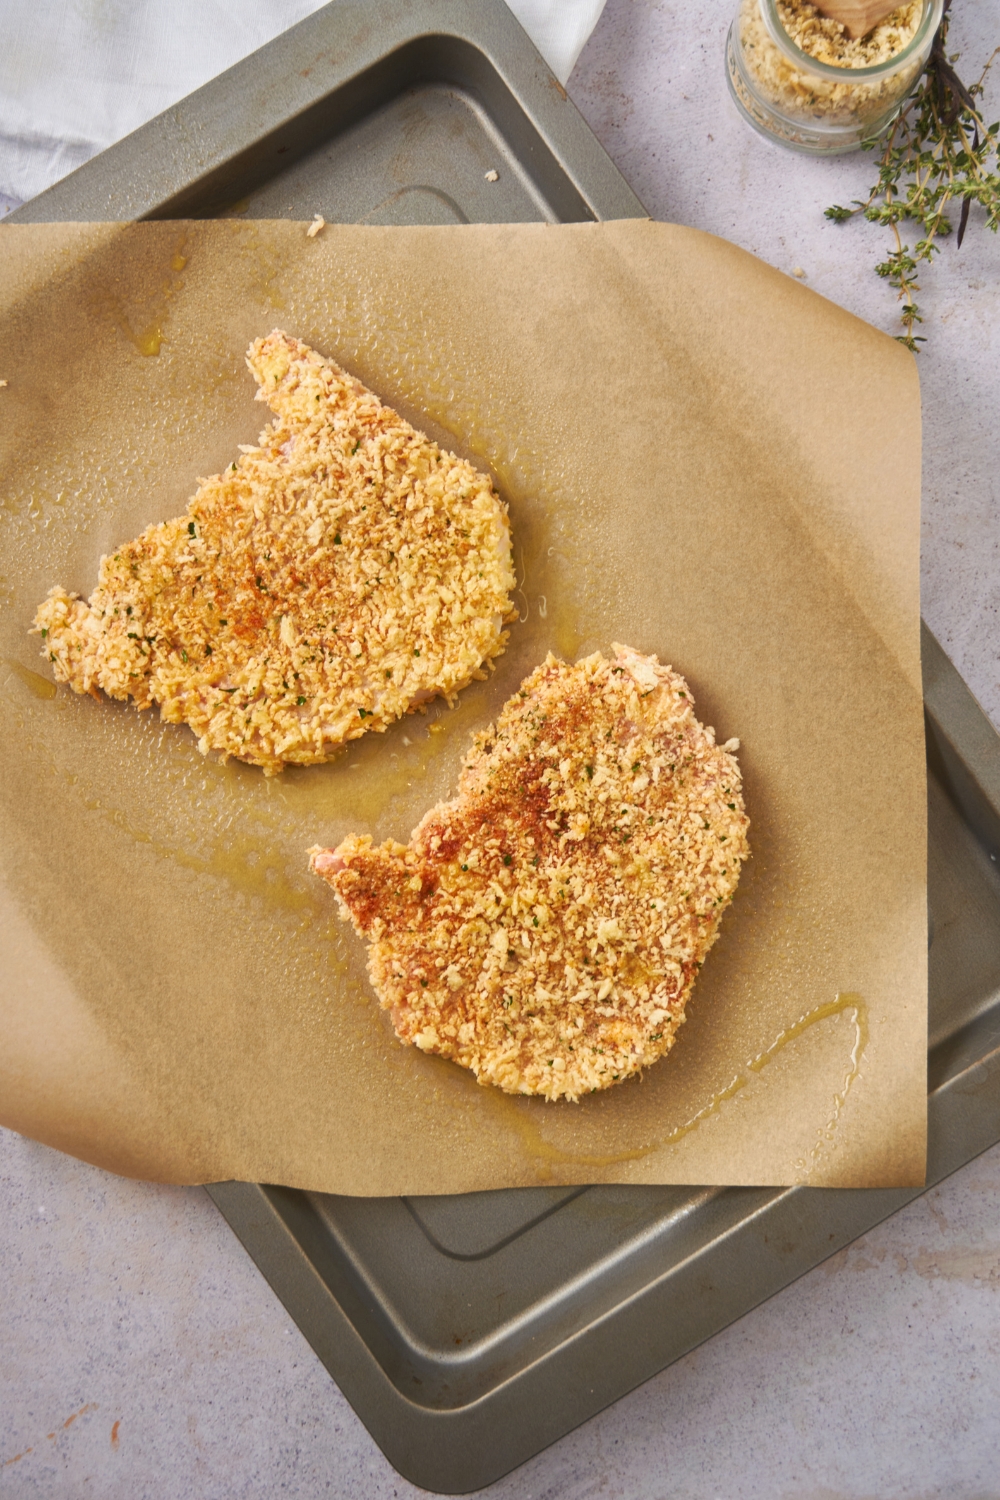 Two raw pork chops coated in a panko breading on a baking sheet lined with parchment paper.